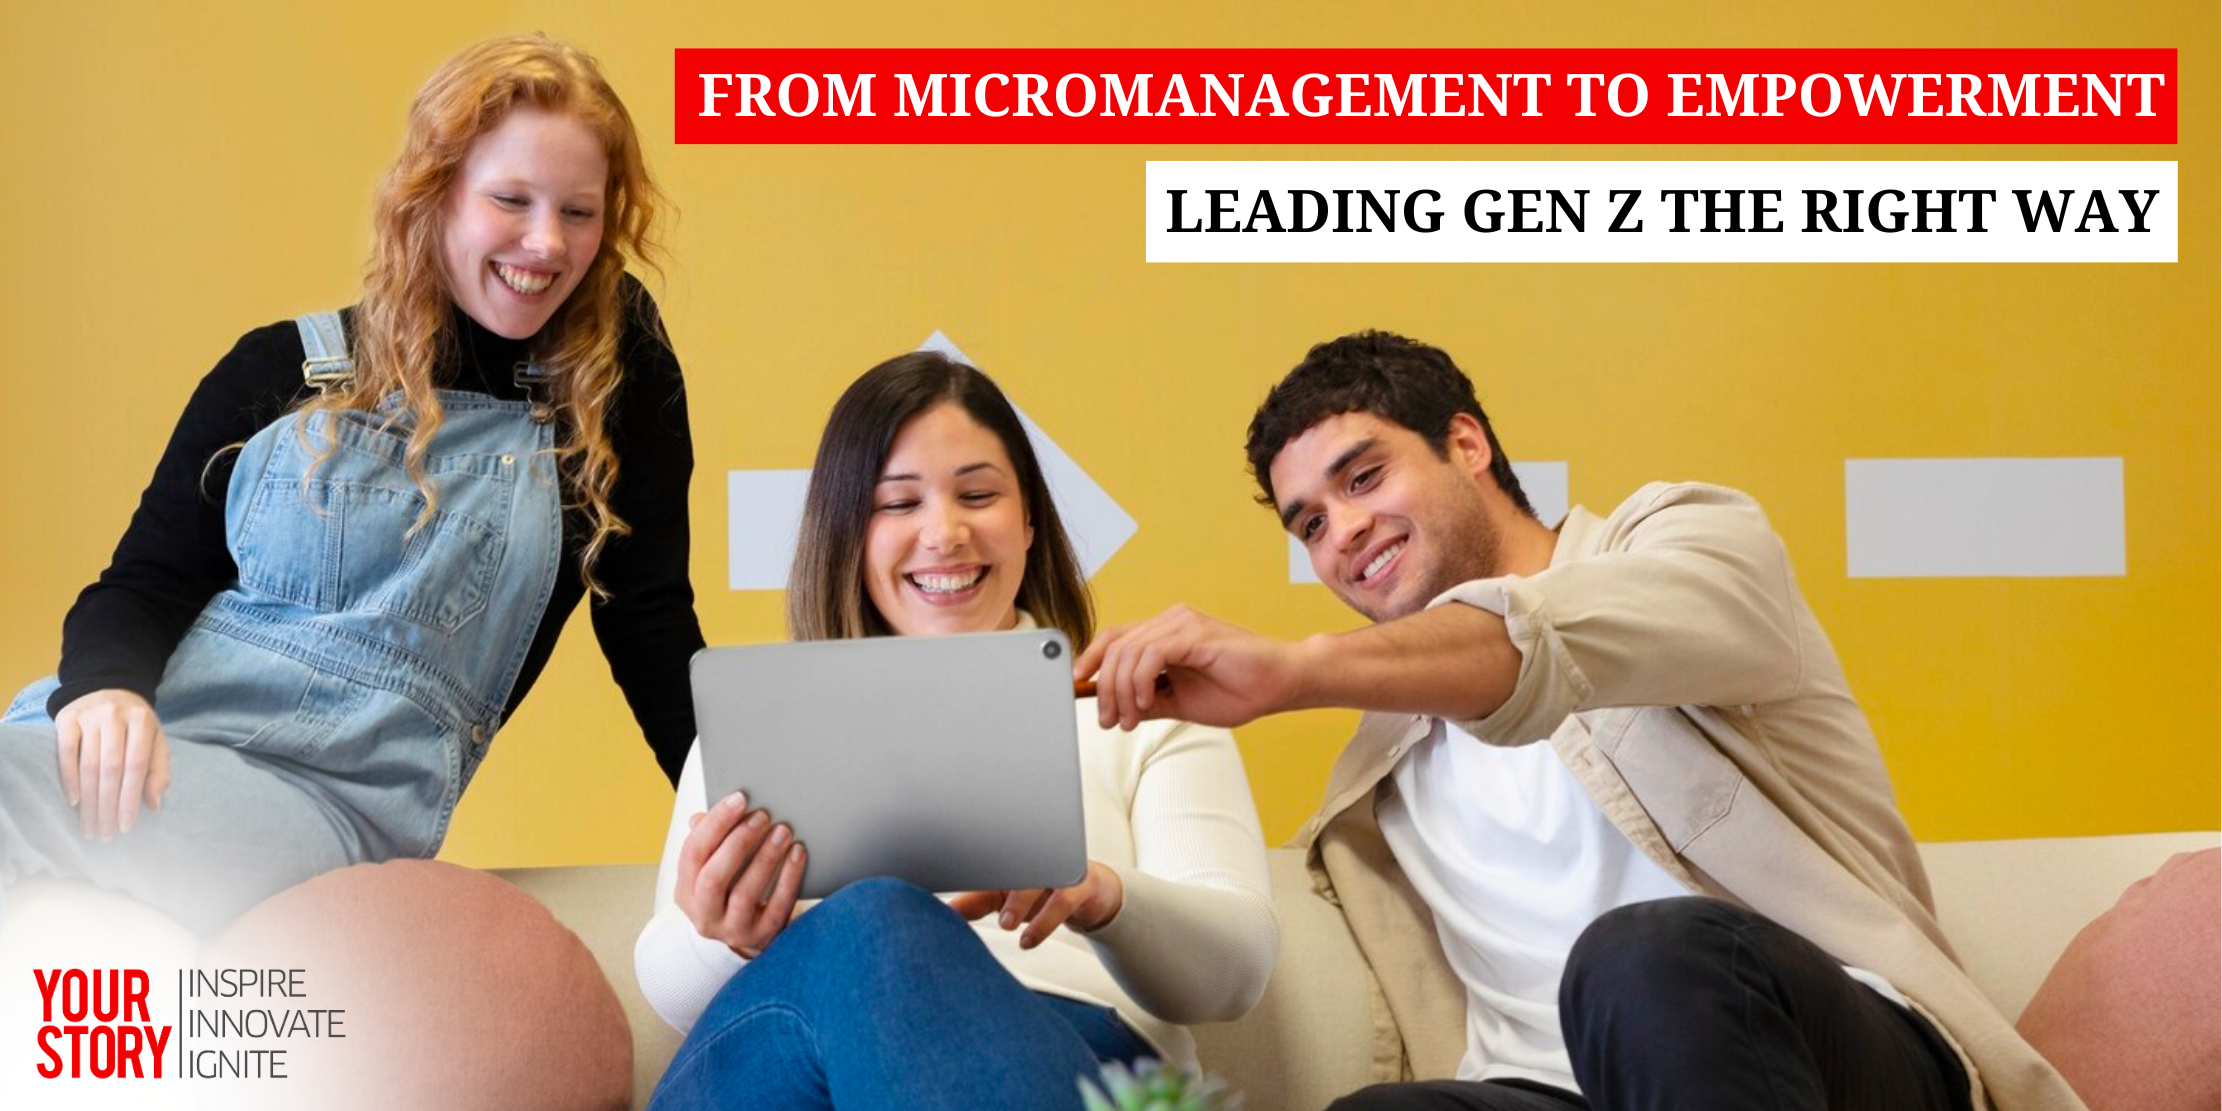 ⁠From Micromanagement to Empowerment: Leading Gen Z the Right Way